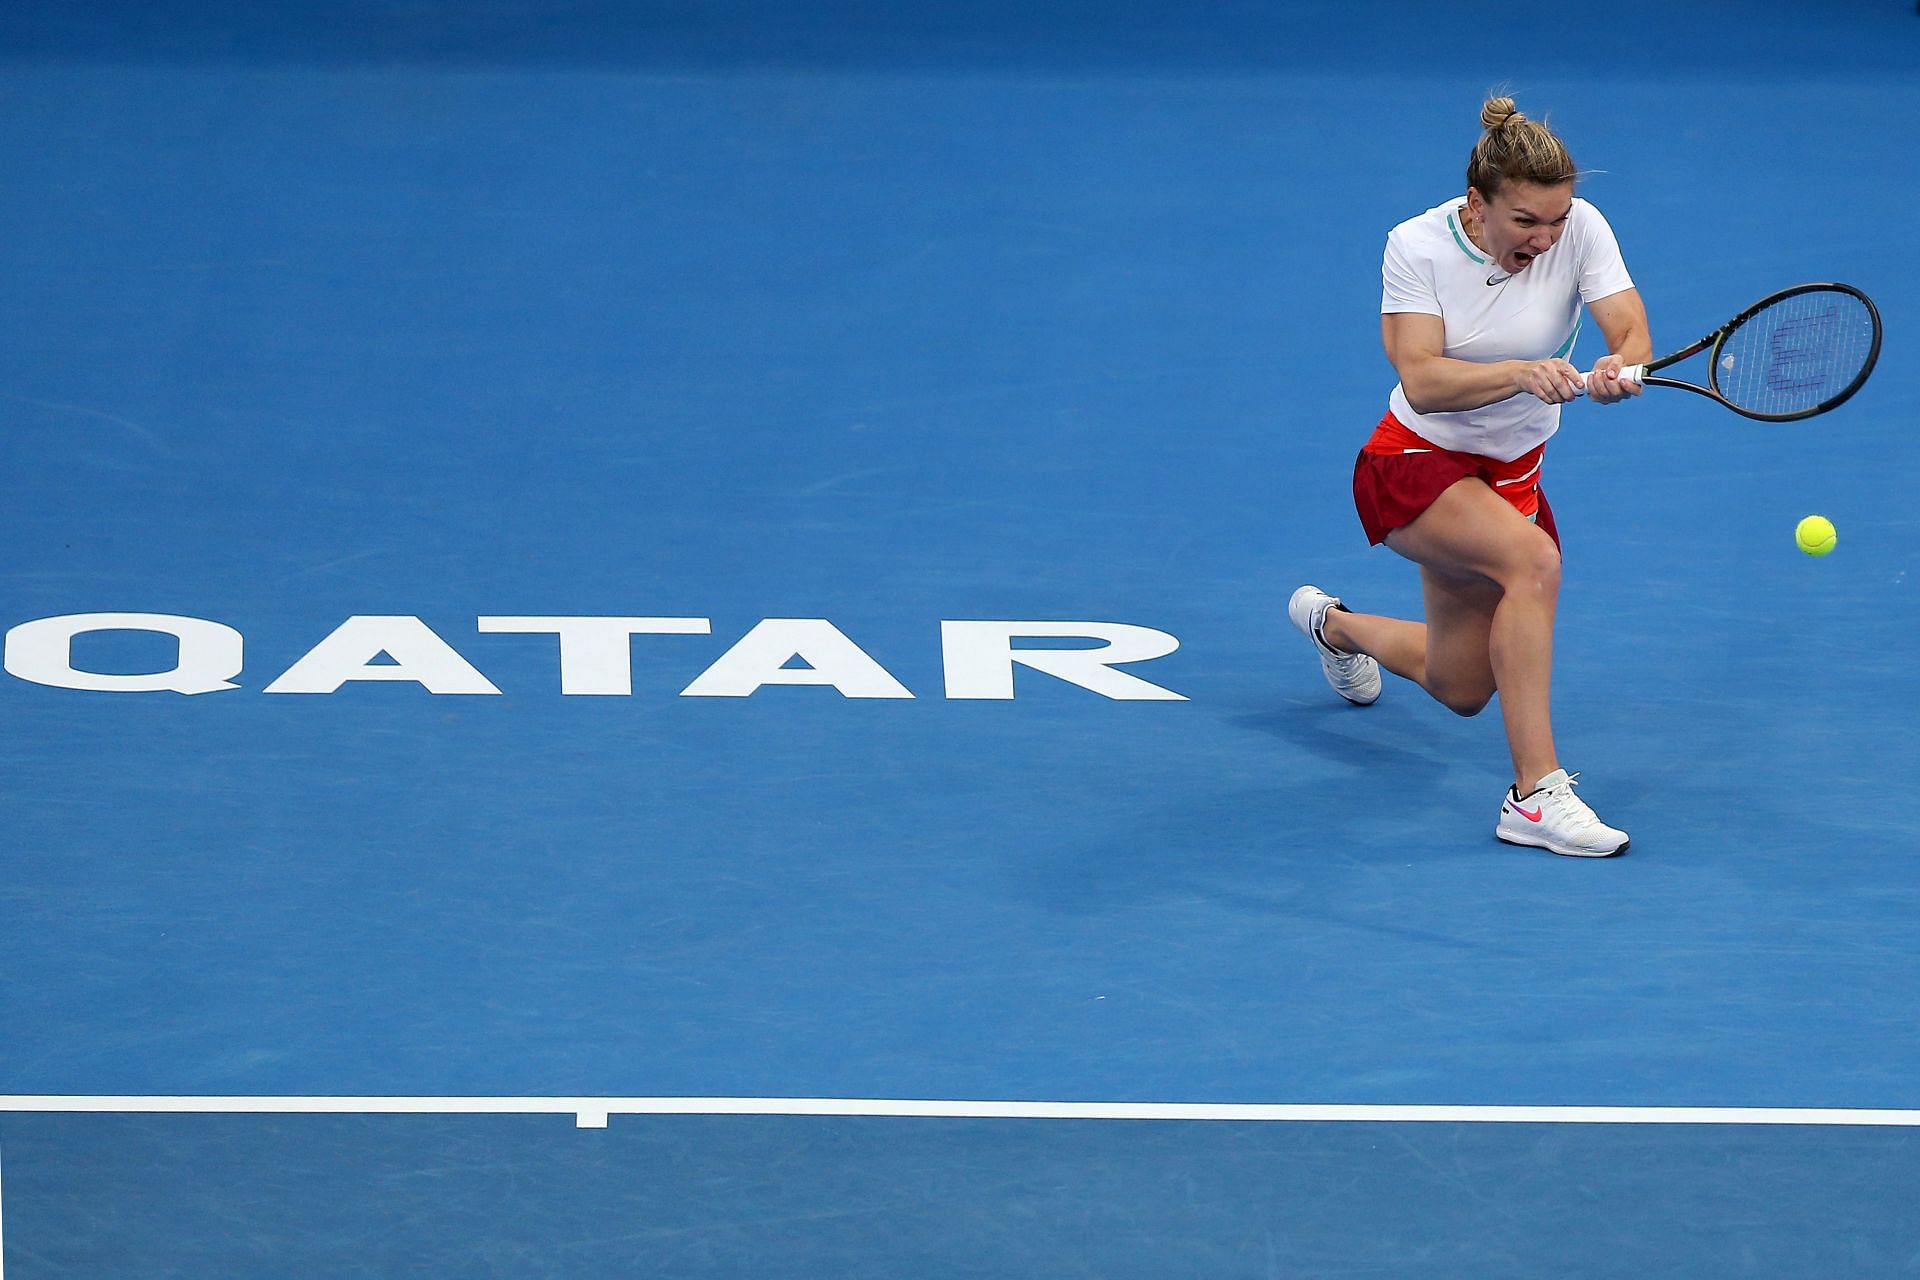 Simona Halep will also be seen in action at the exhibition event.